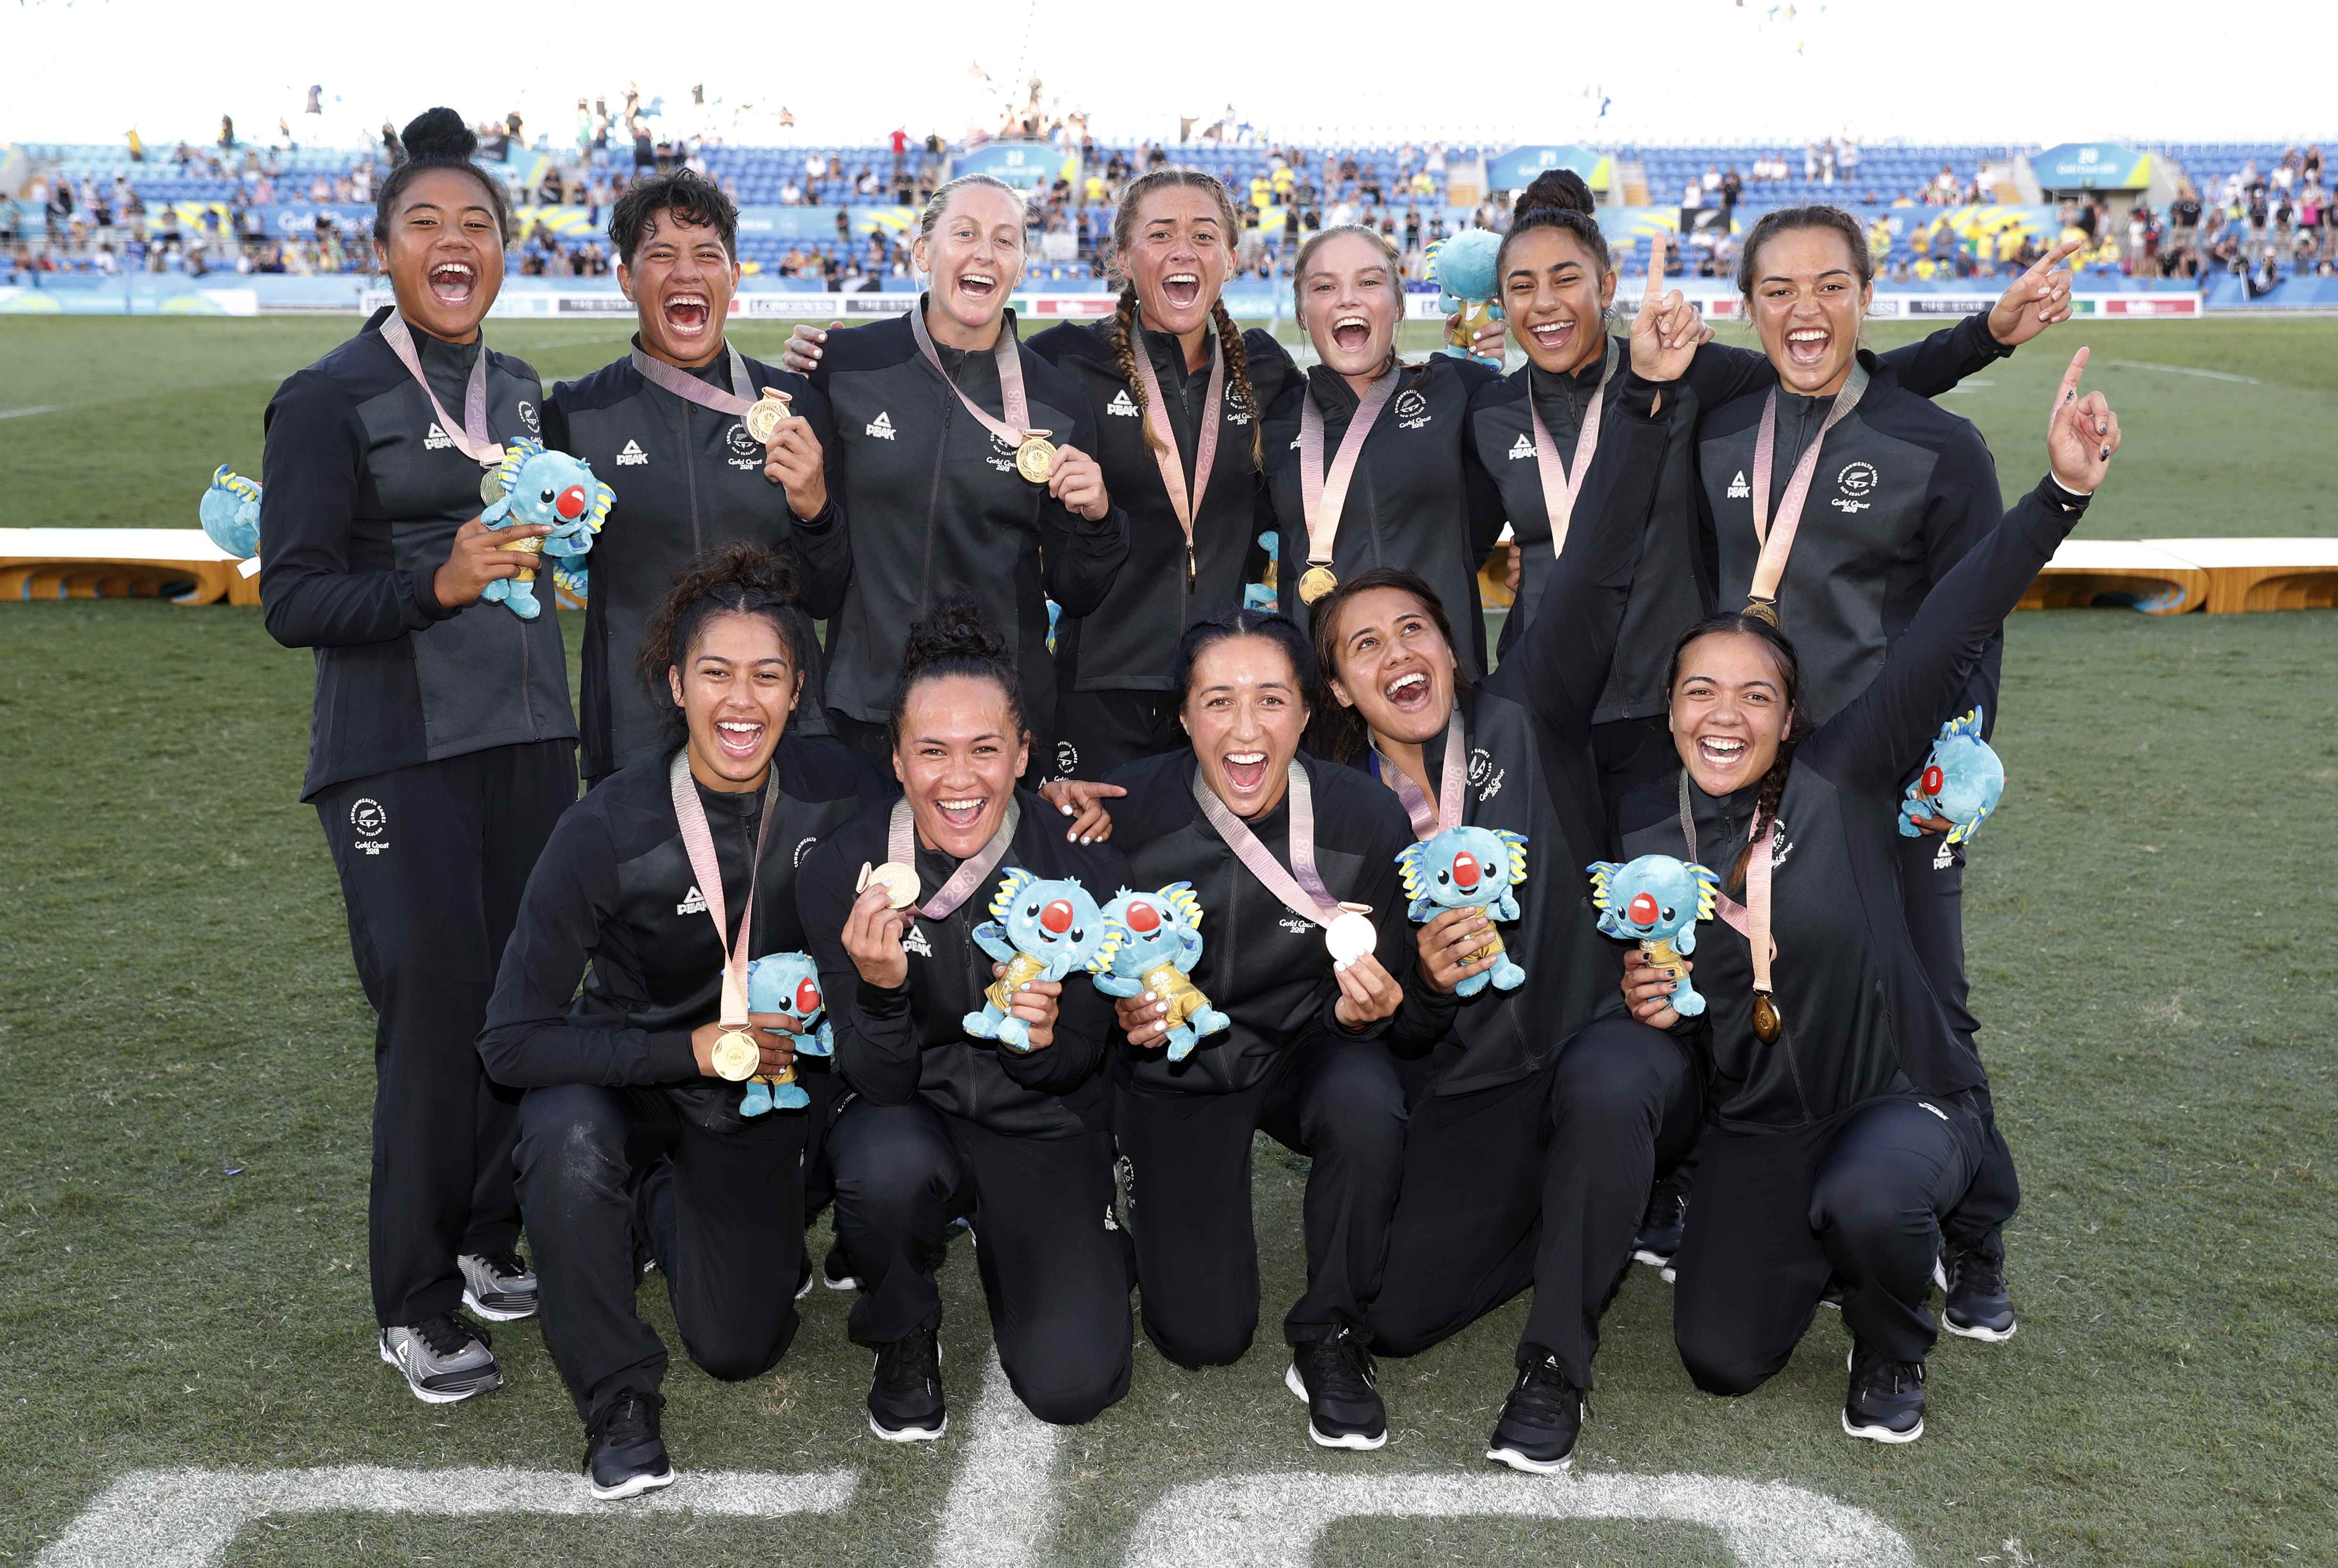 Commonwealth Games: New Zealand strike double gold in rugby sevens